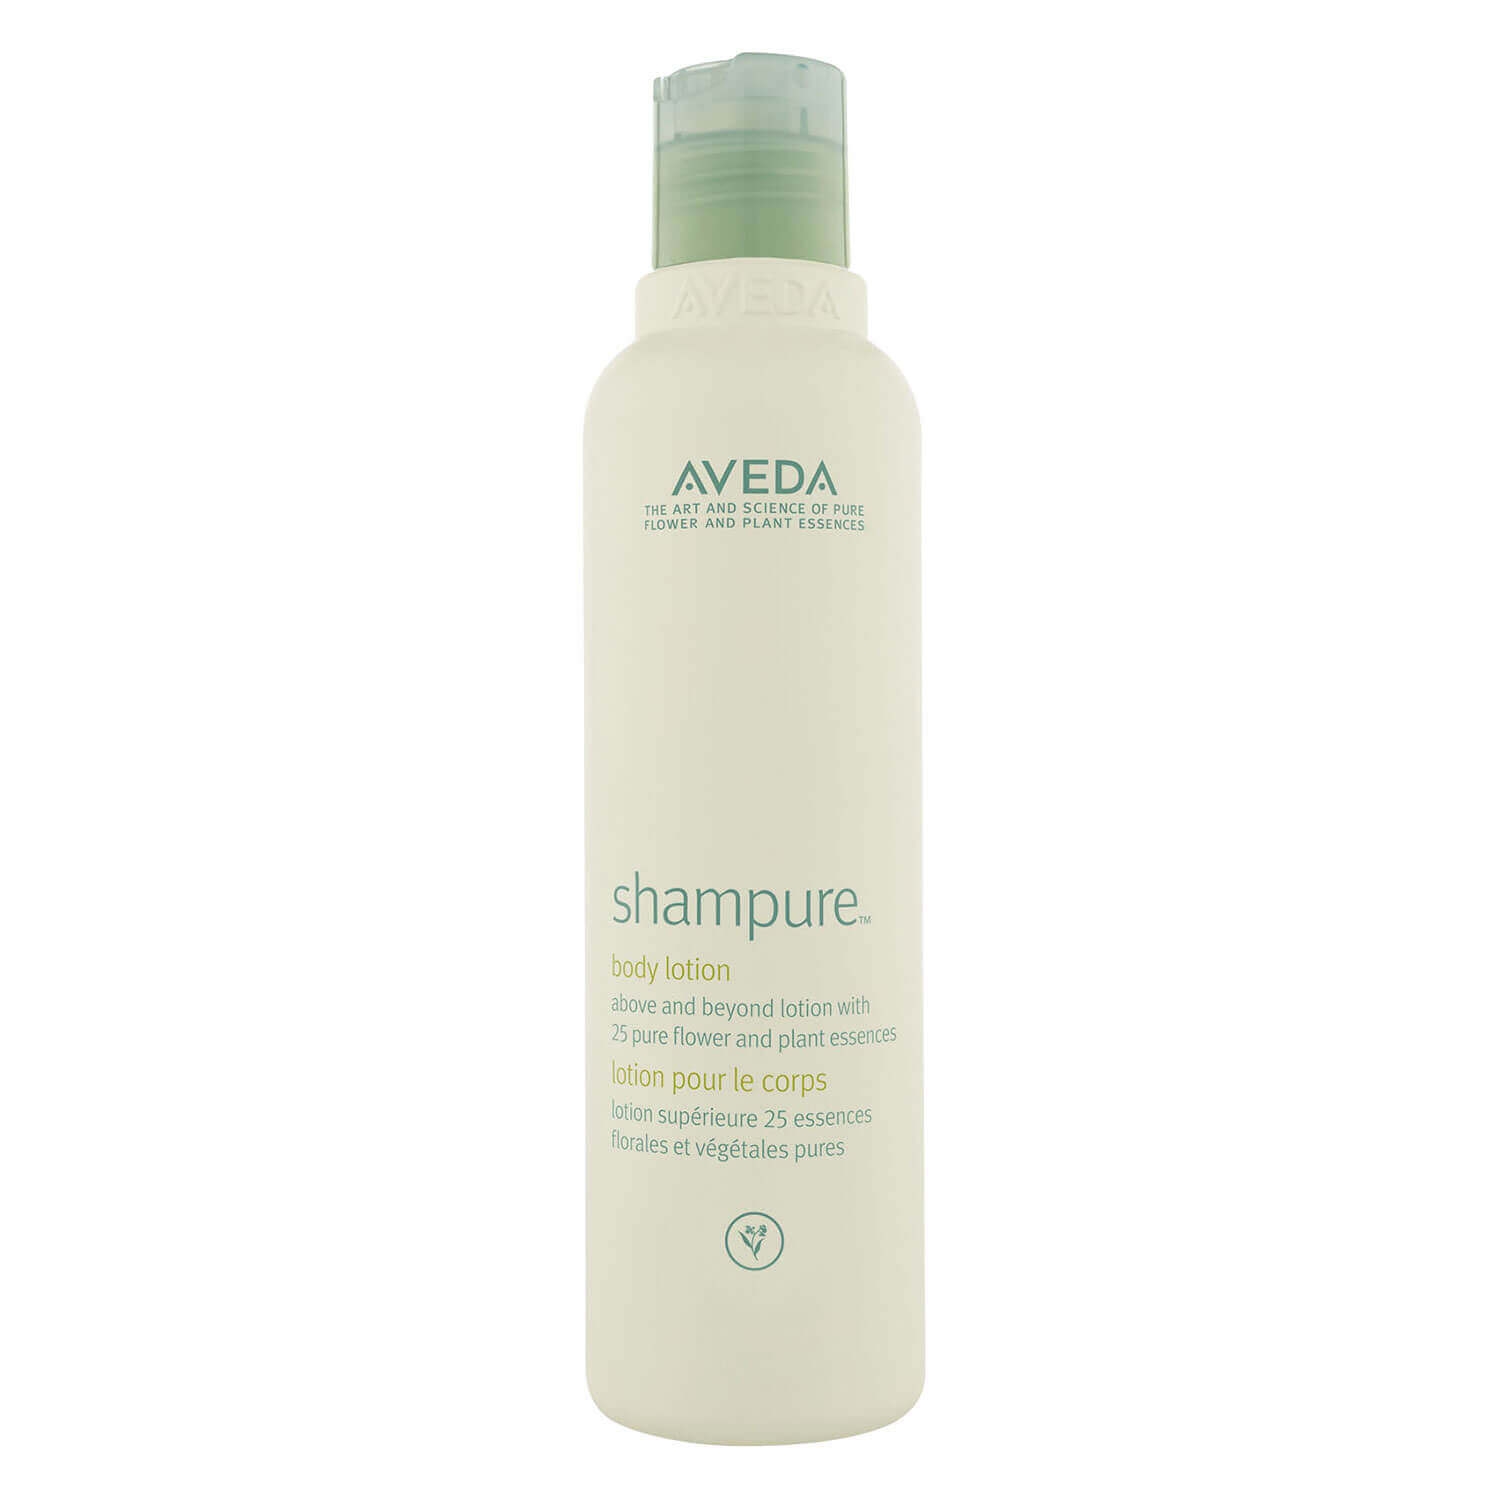 Product image from shampure - body lotion